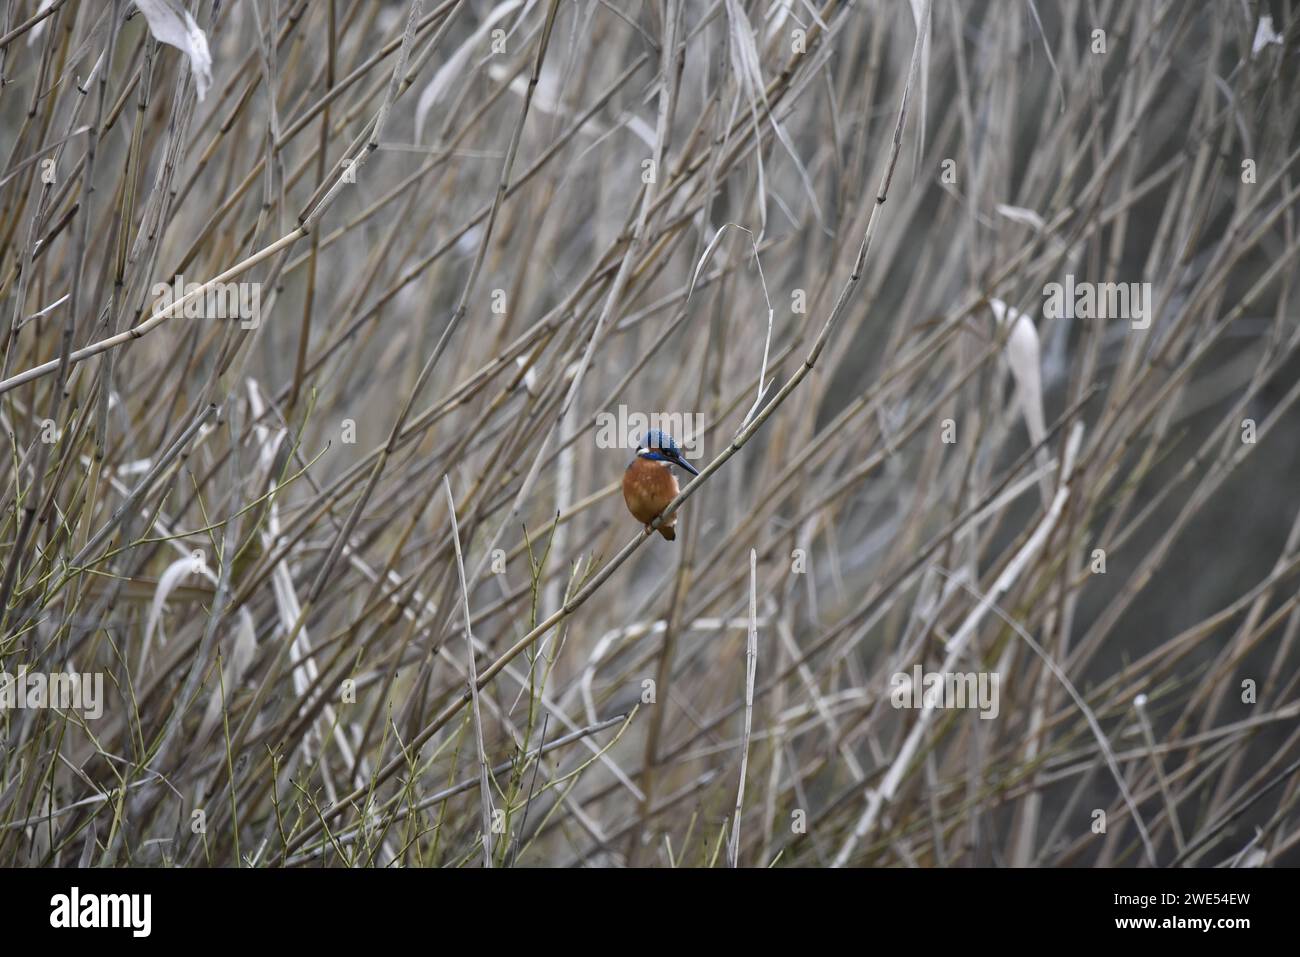 Distant Image of a Common Kingfisher (Alcedo atthis) Facing Camera from Reeds, with Head Looking to Bottom Right, taken in Winter in the UK Stock Photo